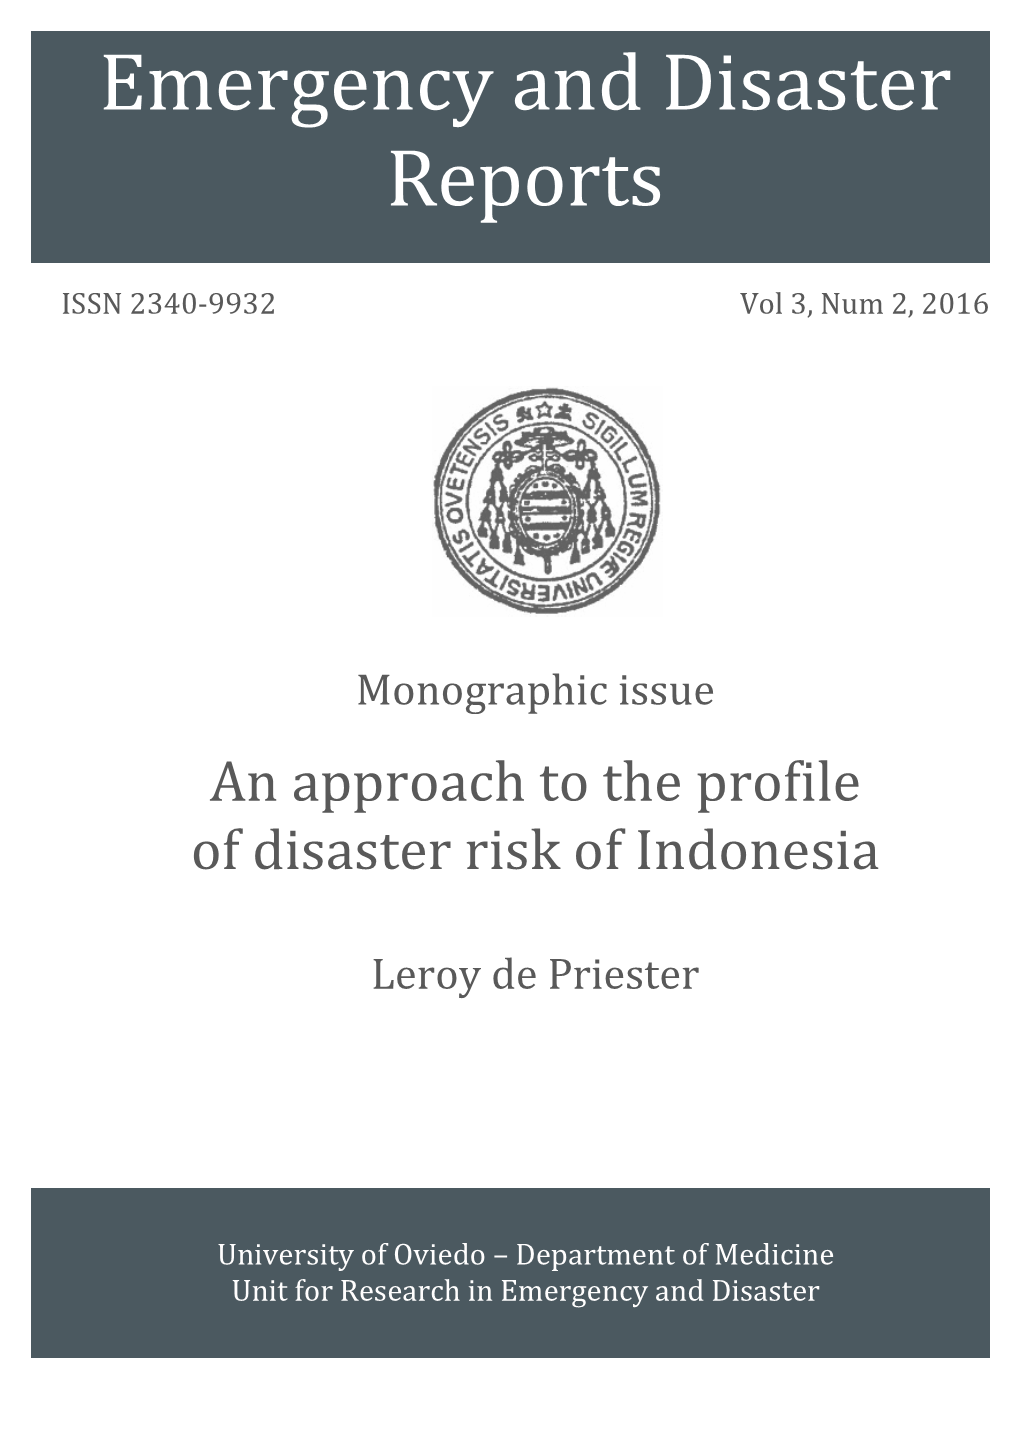 History of Disasters in Indonesia